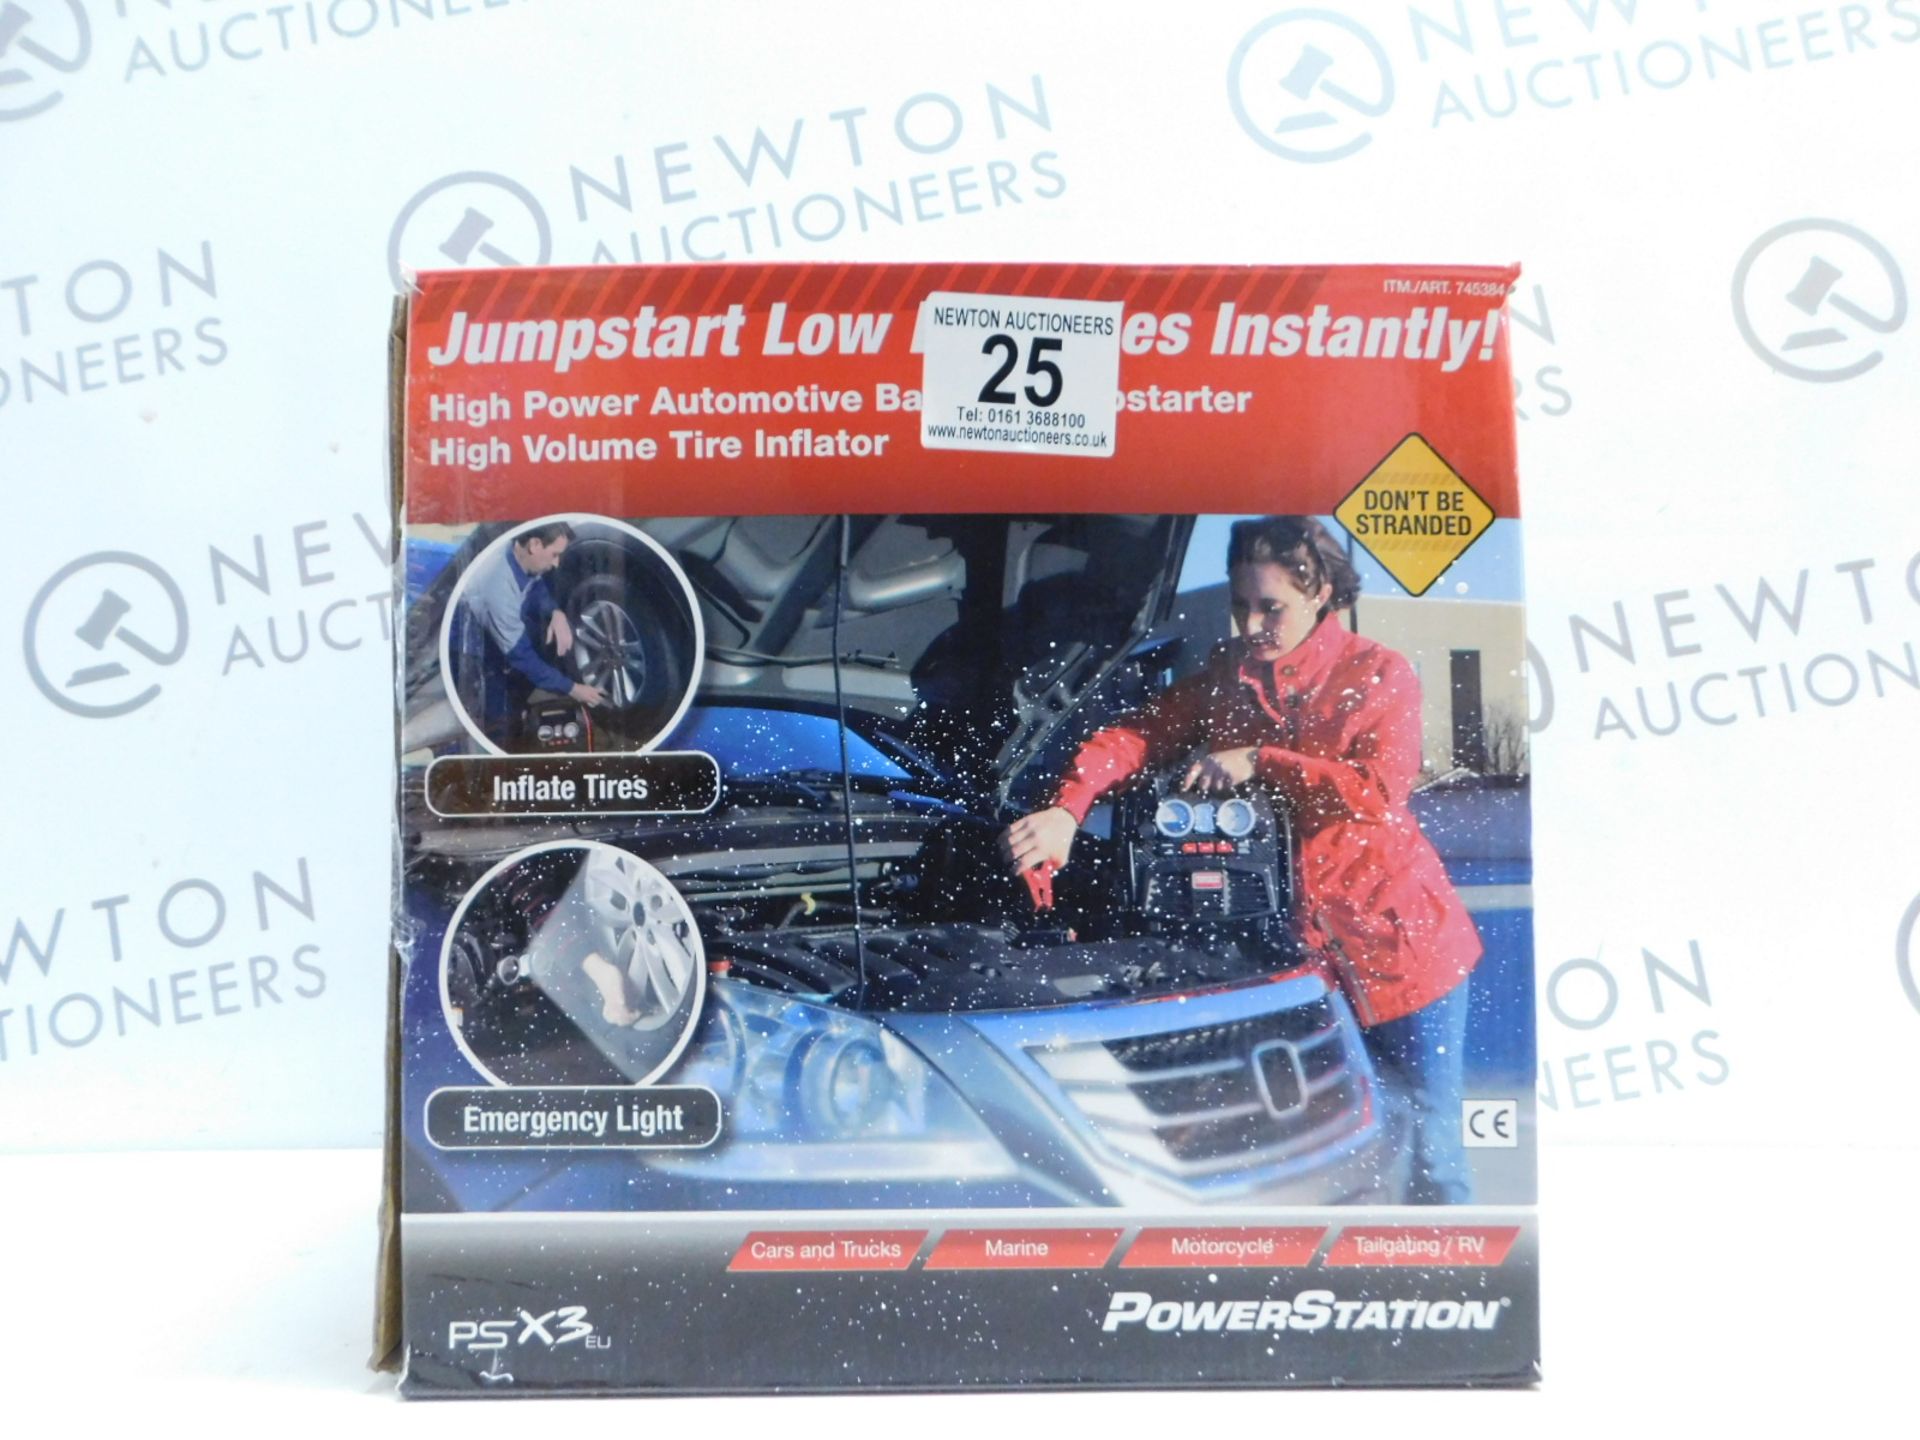 1 BOXED POWERSTATION PSX3 BATTERY JUMPSTARTER WITH BUILT IN LIGHT AND COMPRESSOR RRP Â£159